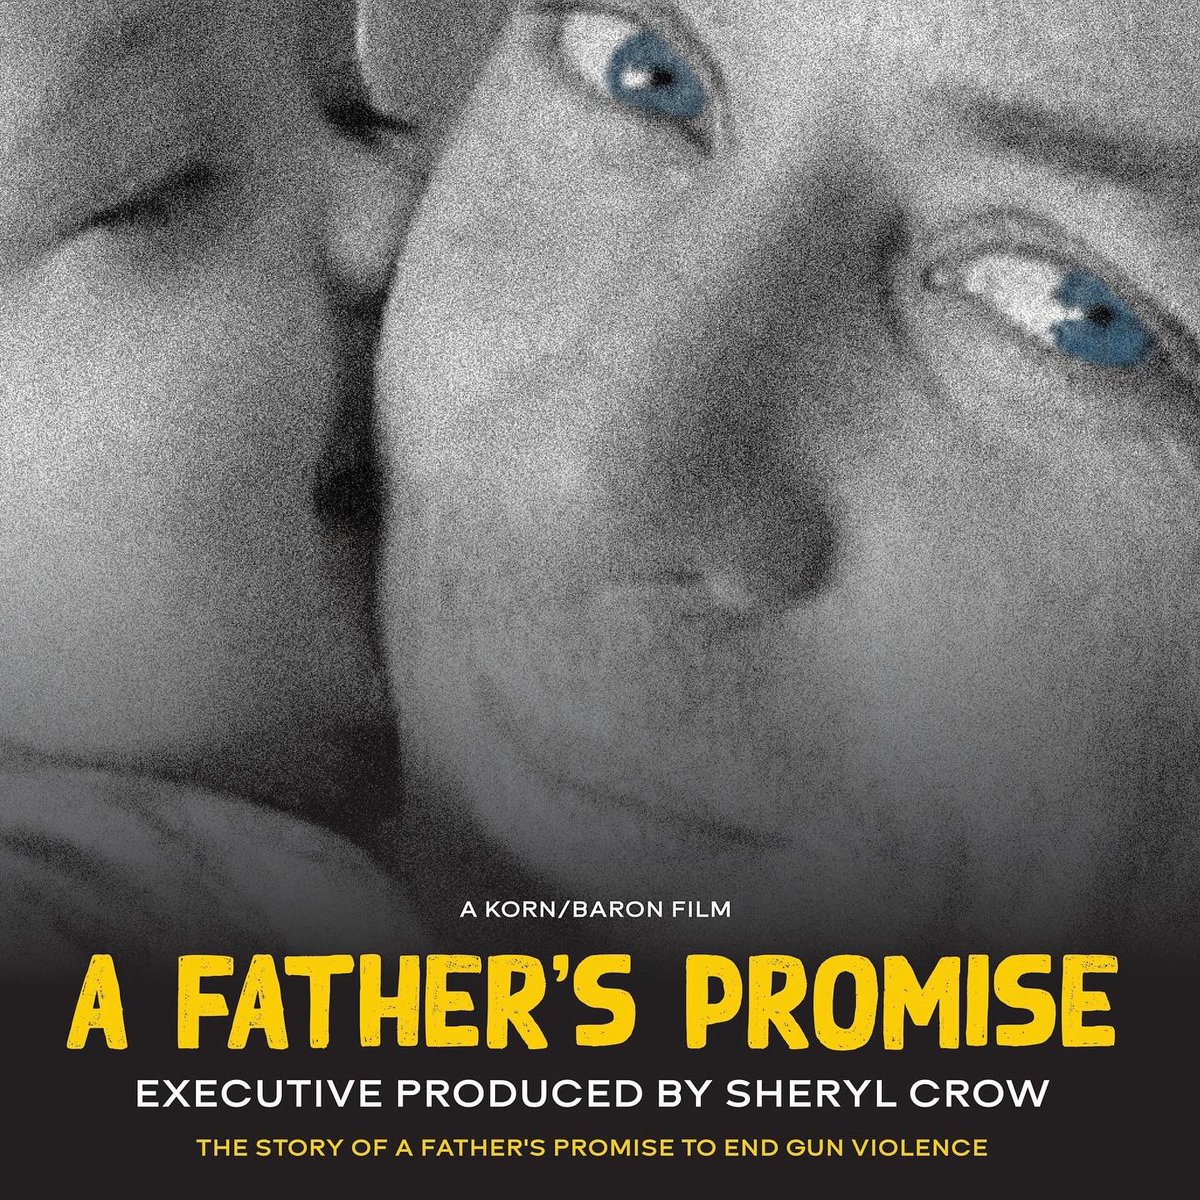 Join us + @ThatKevinSmith tonight @SmodCinemas to support @afaventures, @whereangelsplay26 for a screening of A Father’s Promise + @markbardenSHP @JimmyVMusic concert! Q&A w/Silent Bob, who is not staying so silent on keeping our communities safe Tickets: smodcastlecinemas.com/ticketing/3AC1…